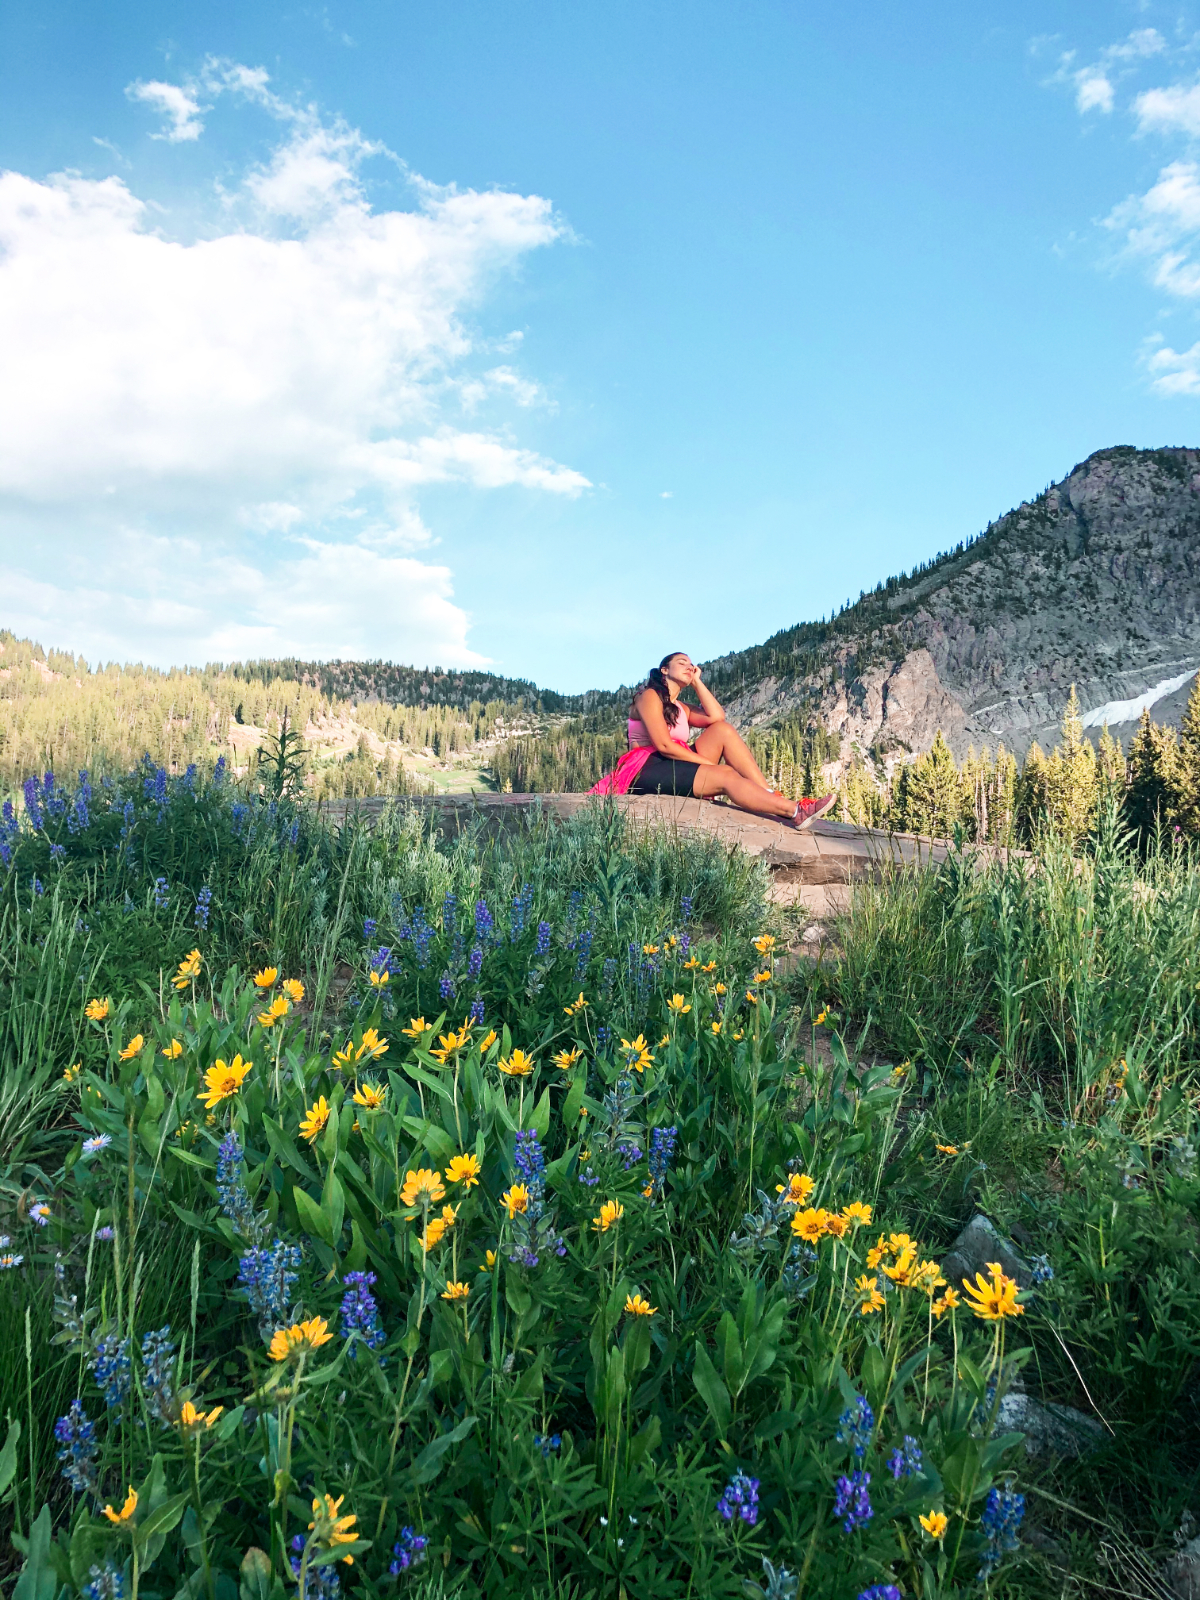 Lauryncakes (Lauryn Hock) wearing a hiking outfit while sitting on a rock in the Wasatch mountains surrounded by meadows of wildflowers at Albion Basin